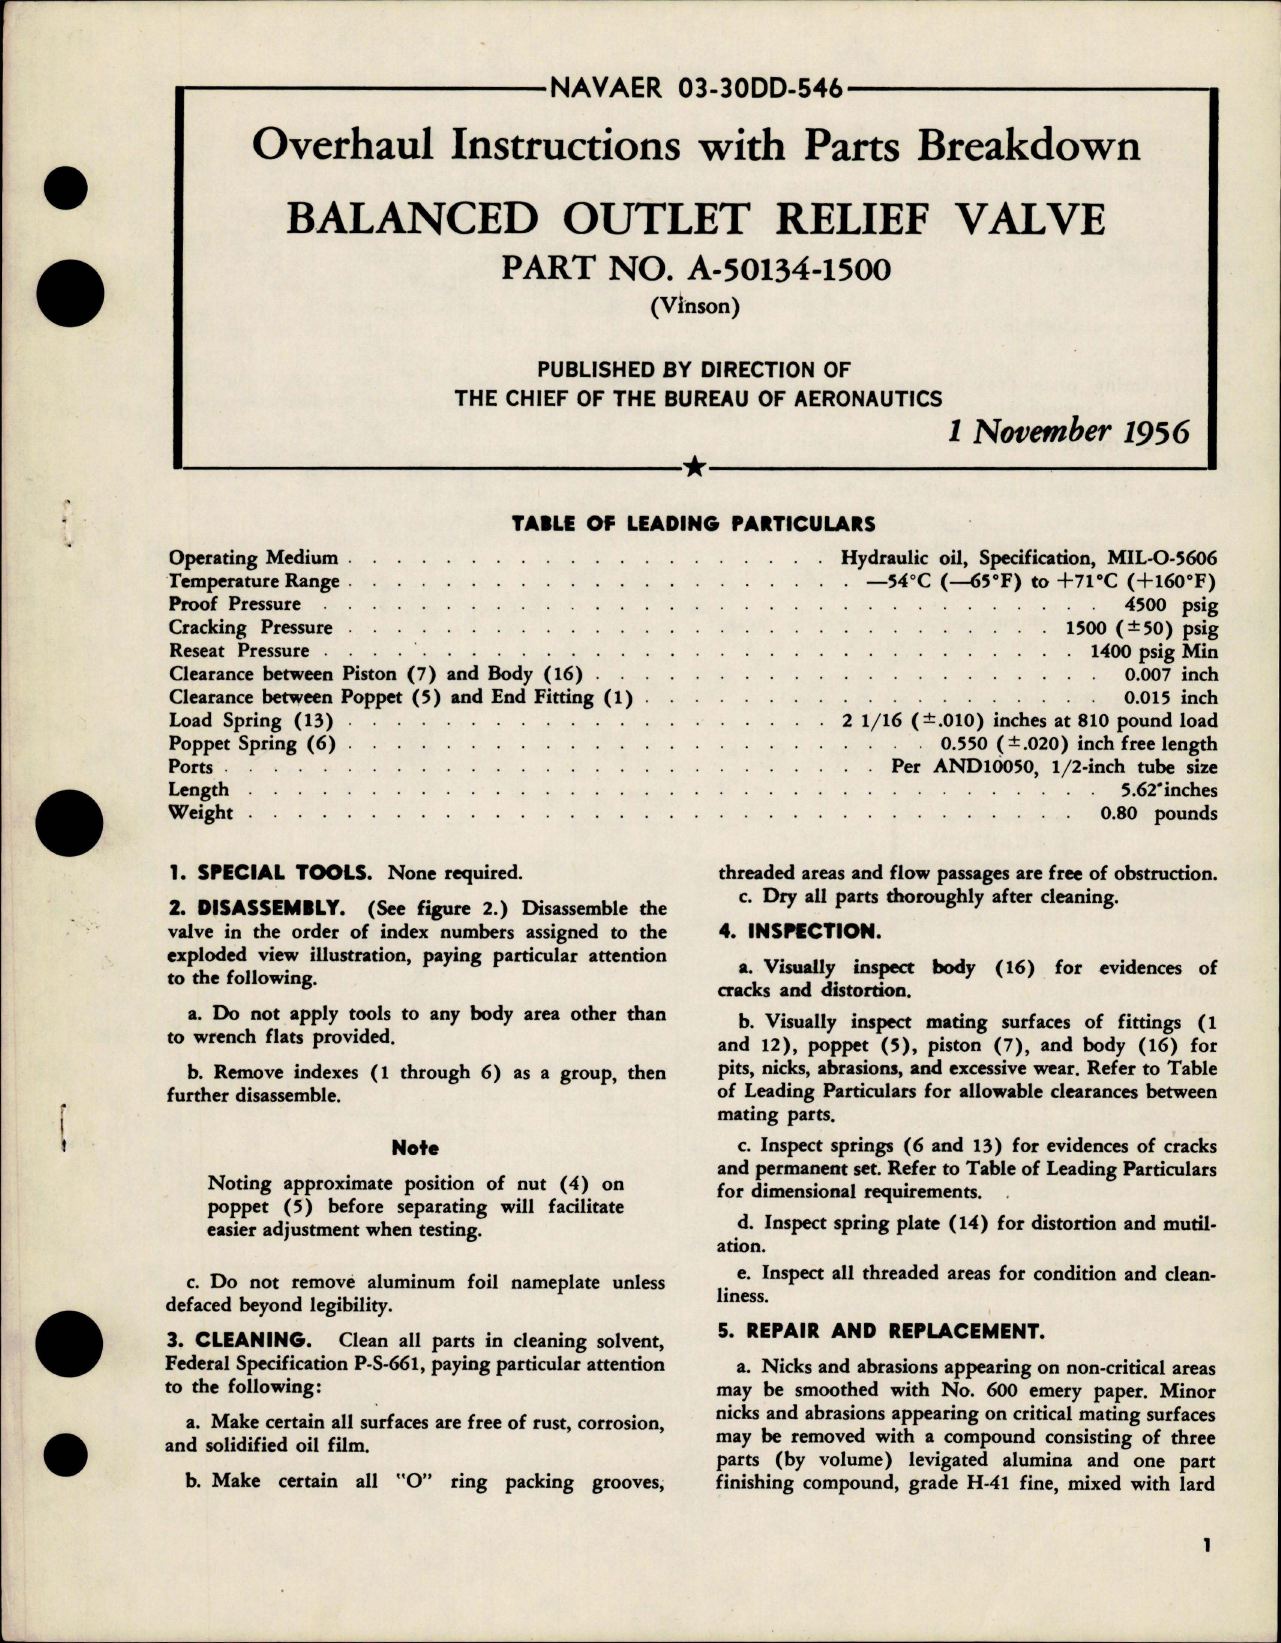 Sample page 1 from AirCorps Library document: Overhaul Instructions with Parts Breakdown for Balanced Outlet Relief Valve - Part A-50134-1500 